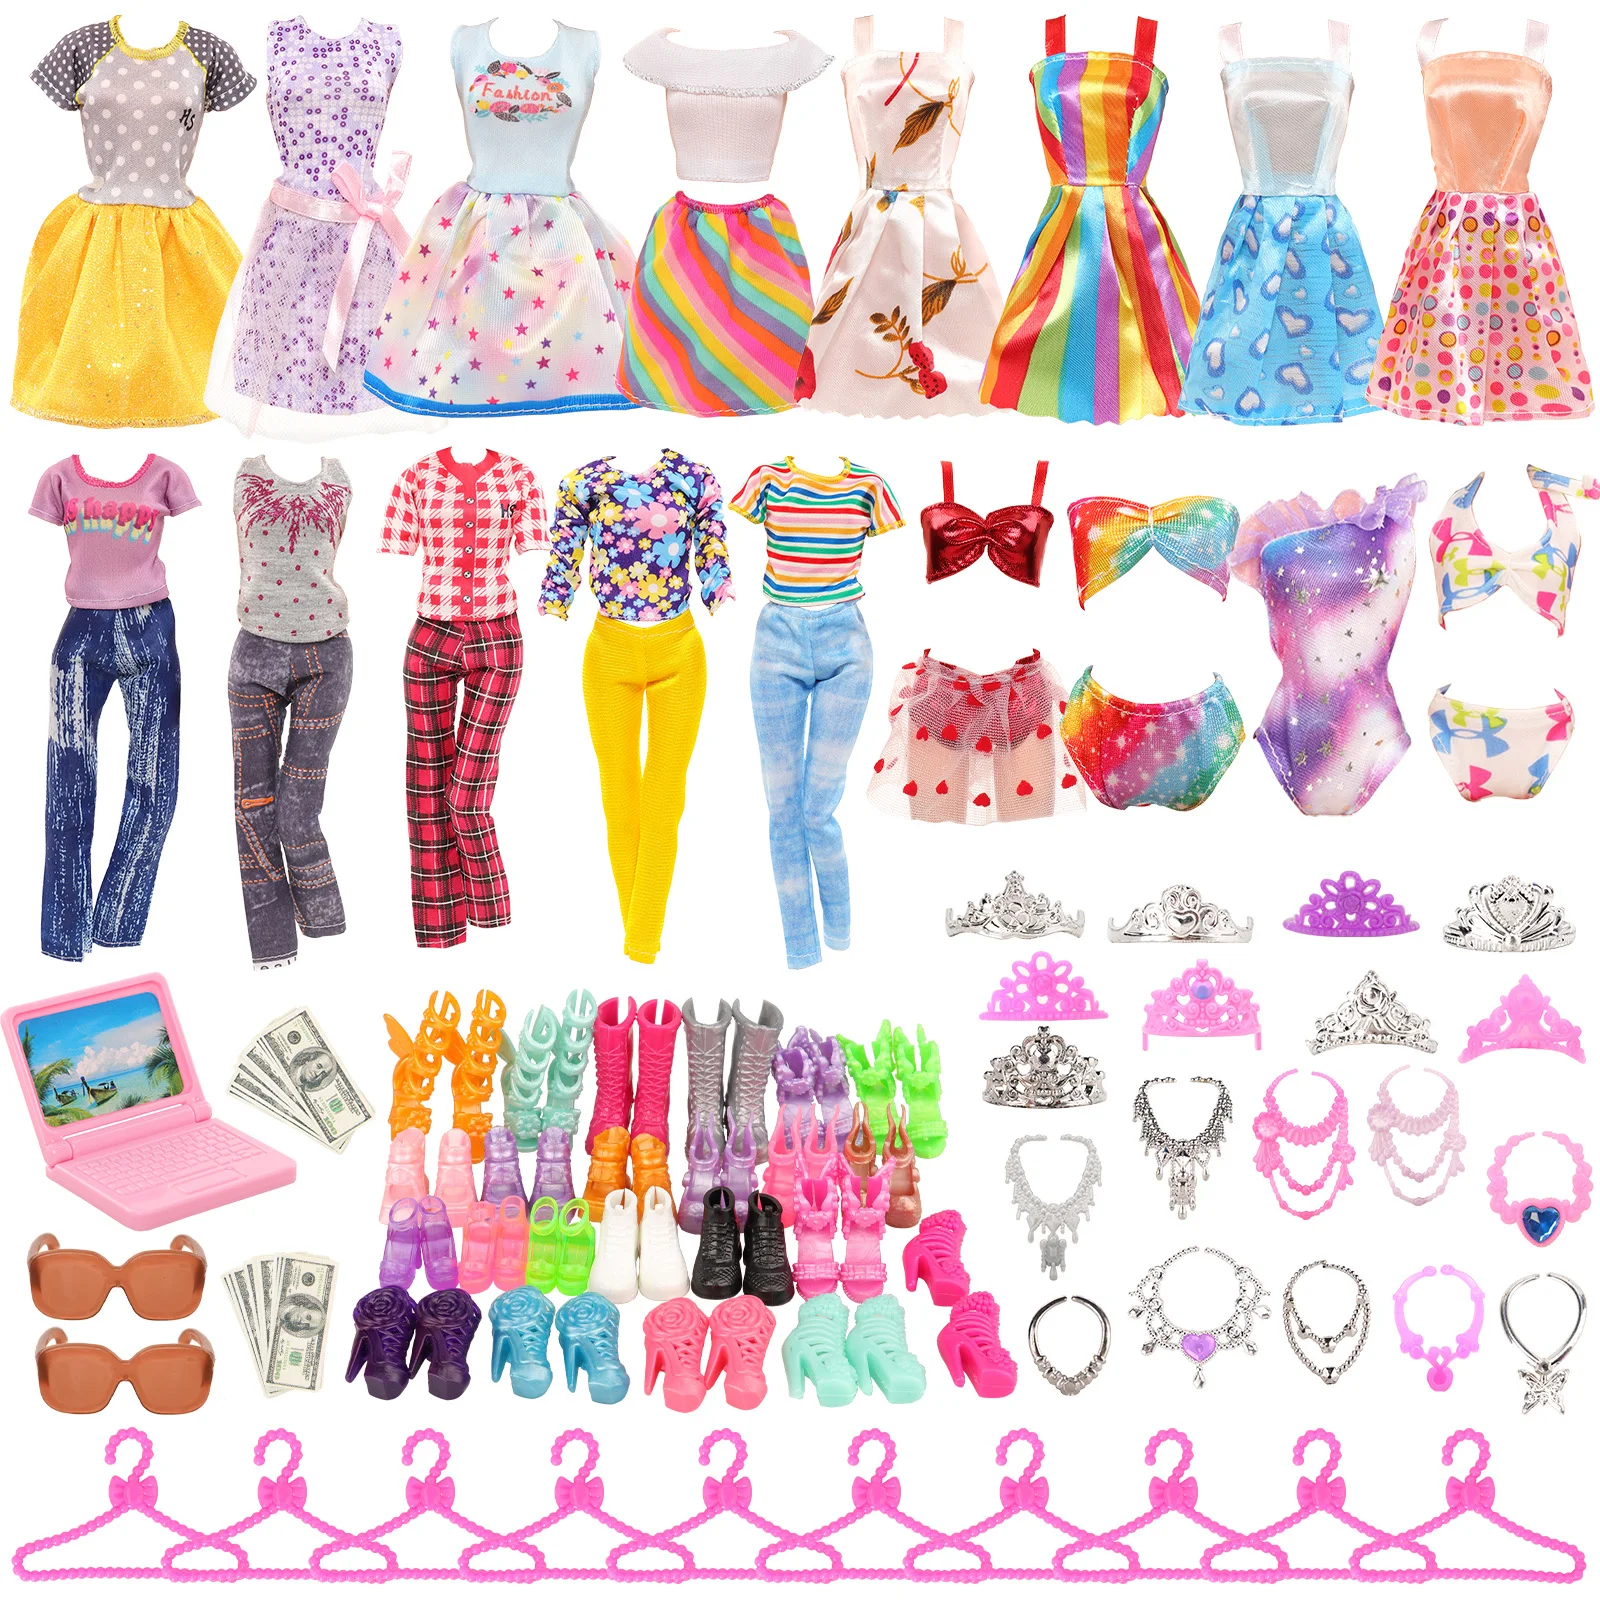 Barwa New Arrival 49 Pcs Fashion For Barbie Doll Clothes and Accessories=7  Dress 3 Coat Pants 2 Swimsuit 10 Shoes 17 Kids Toys - AliExpress